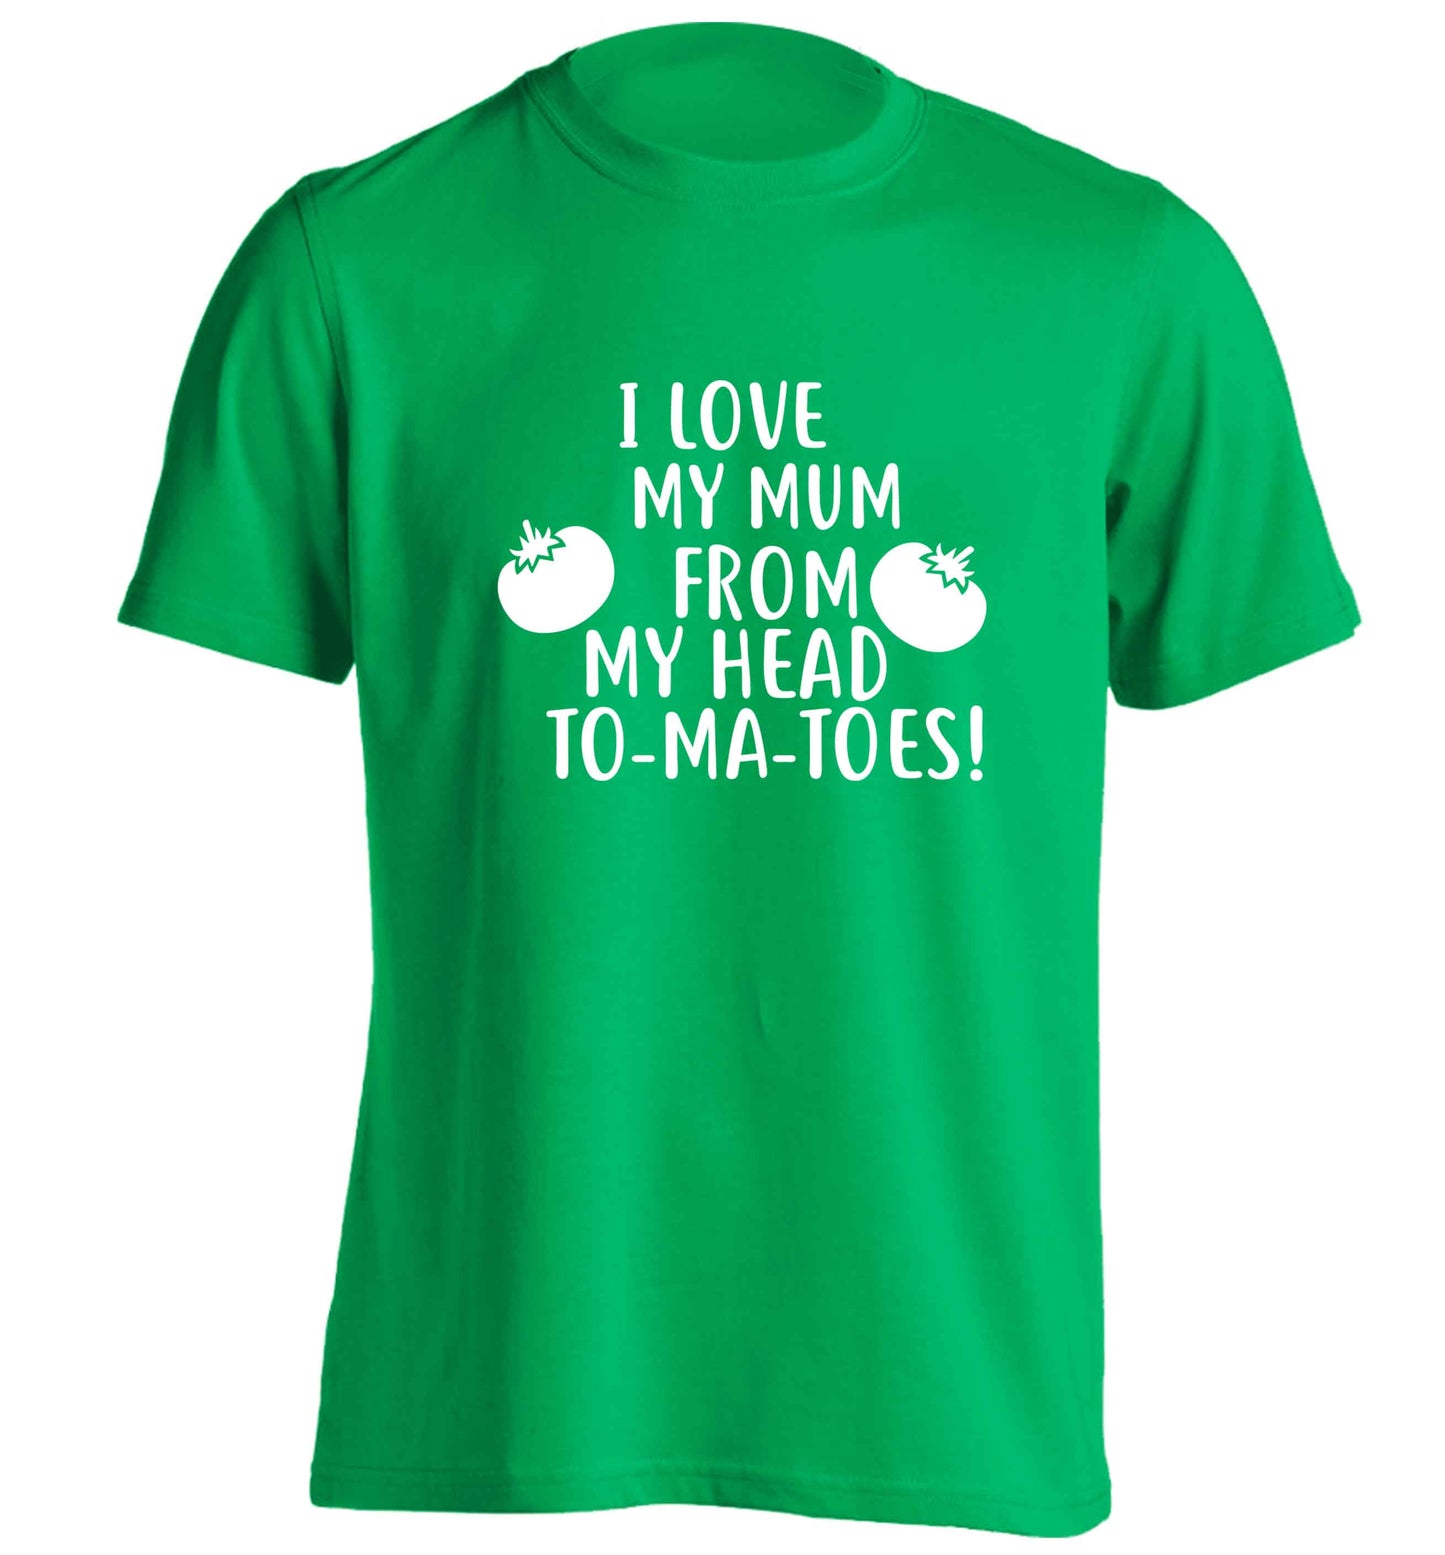 I love my mum from my head to-my-toes! adults unisex green Tshirt small